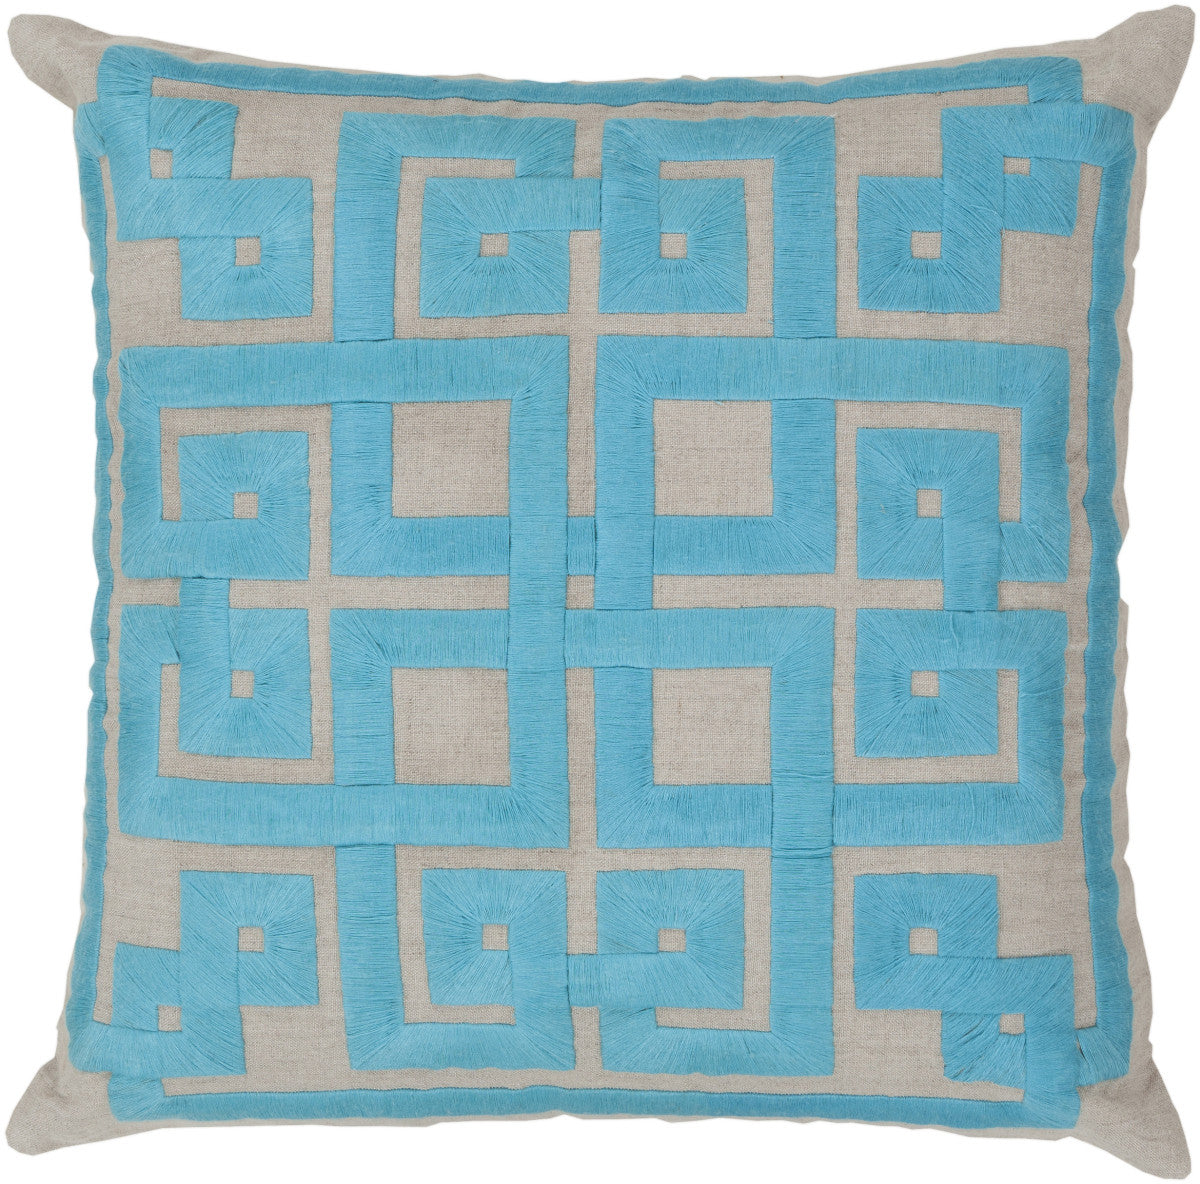 Surya Gramercy Intersected Geometrics LD-009 Pillow by Beth Lacefield